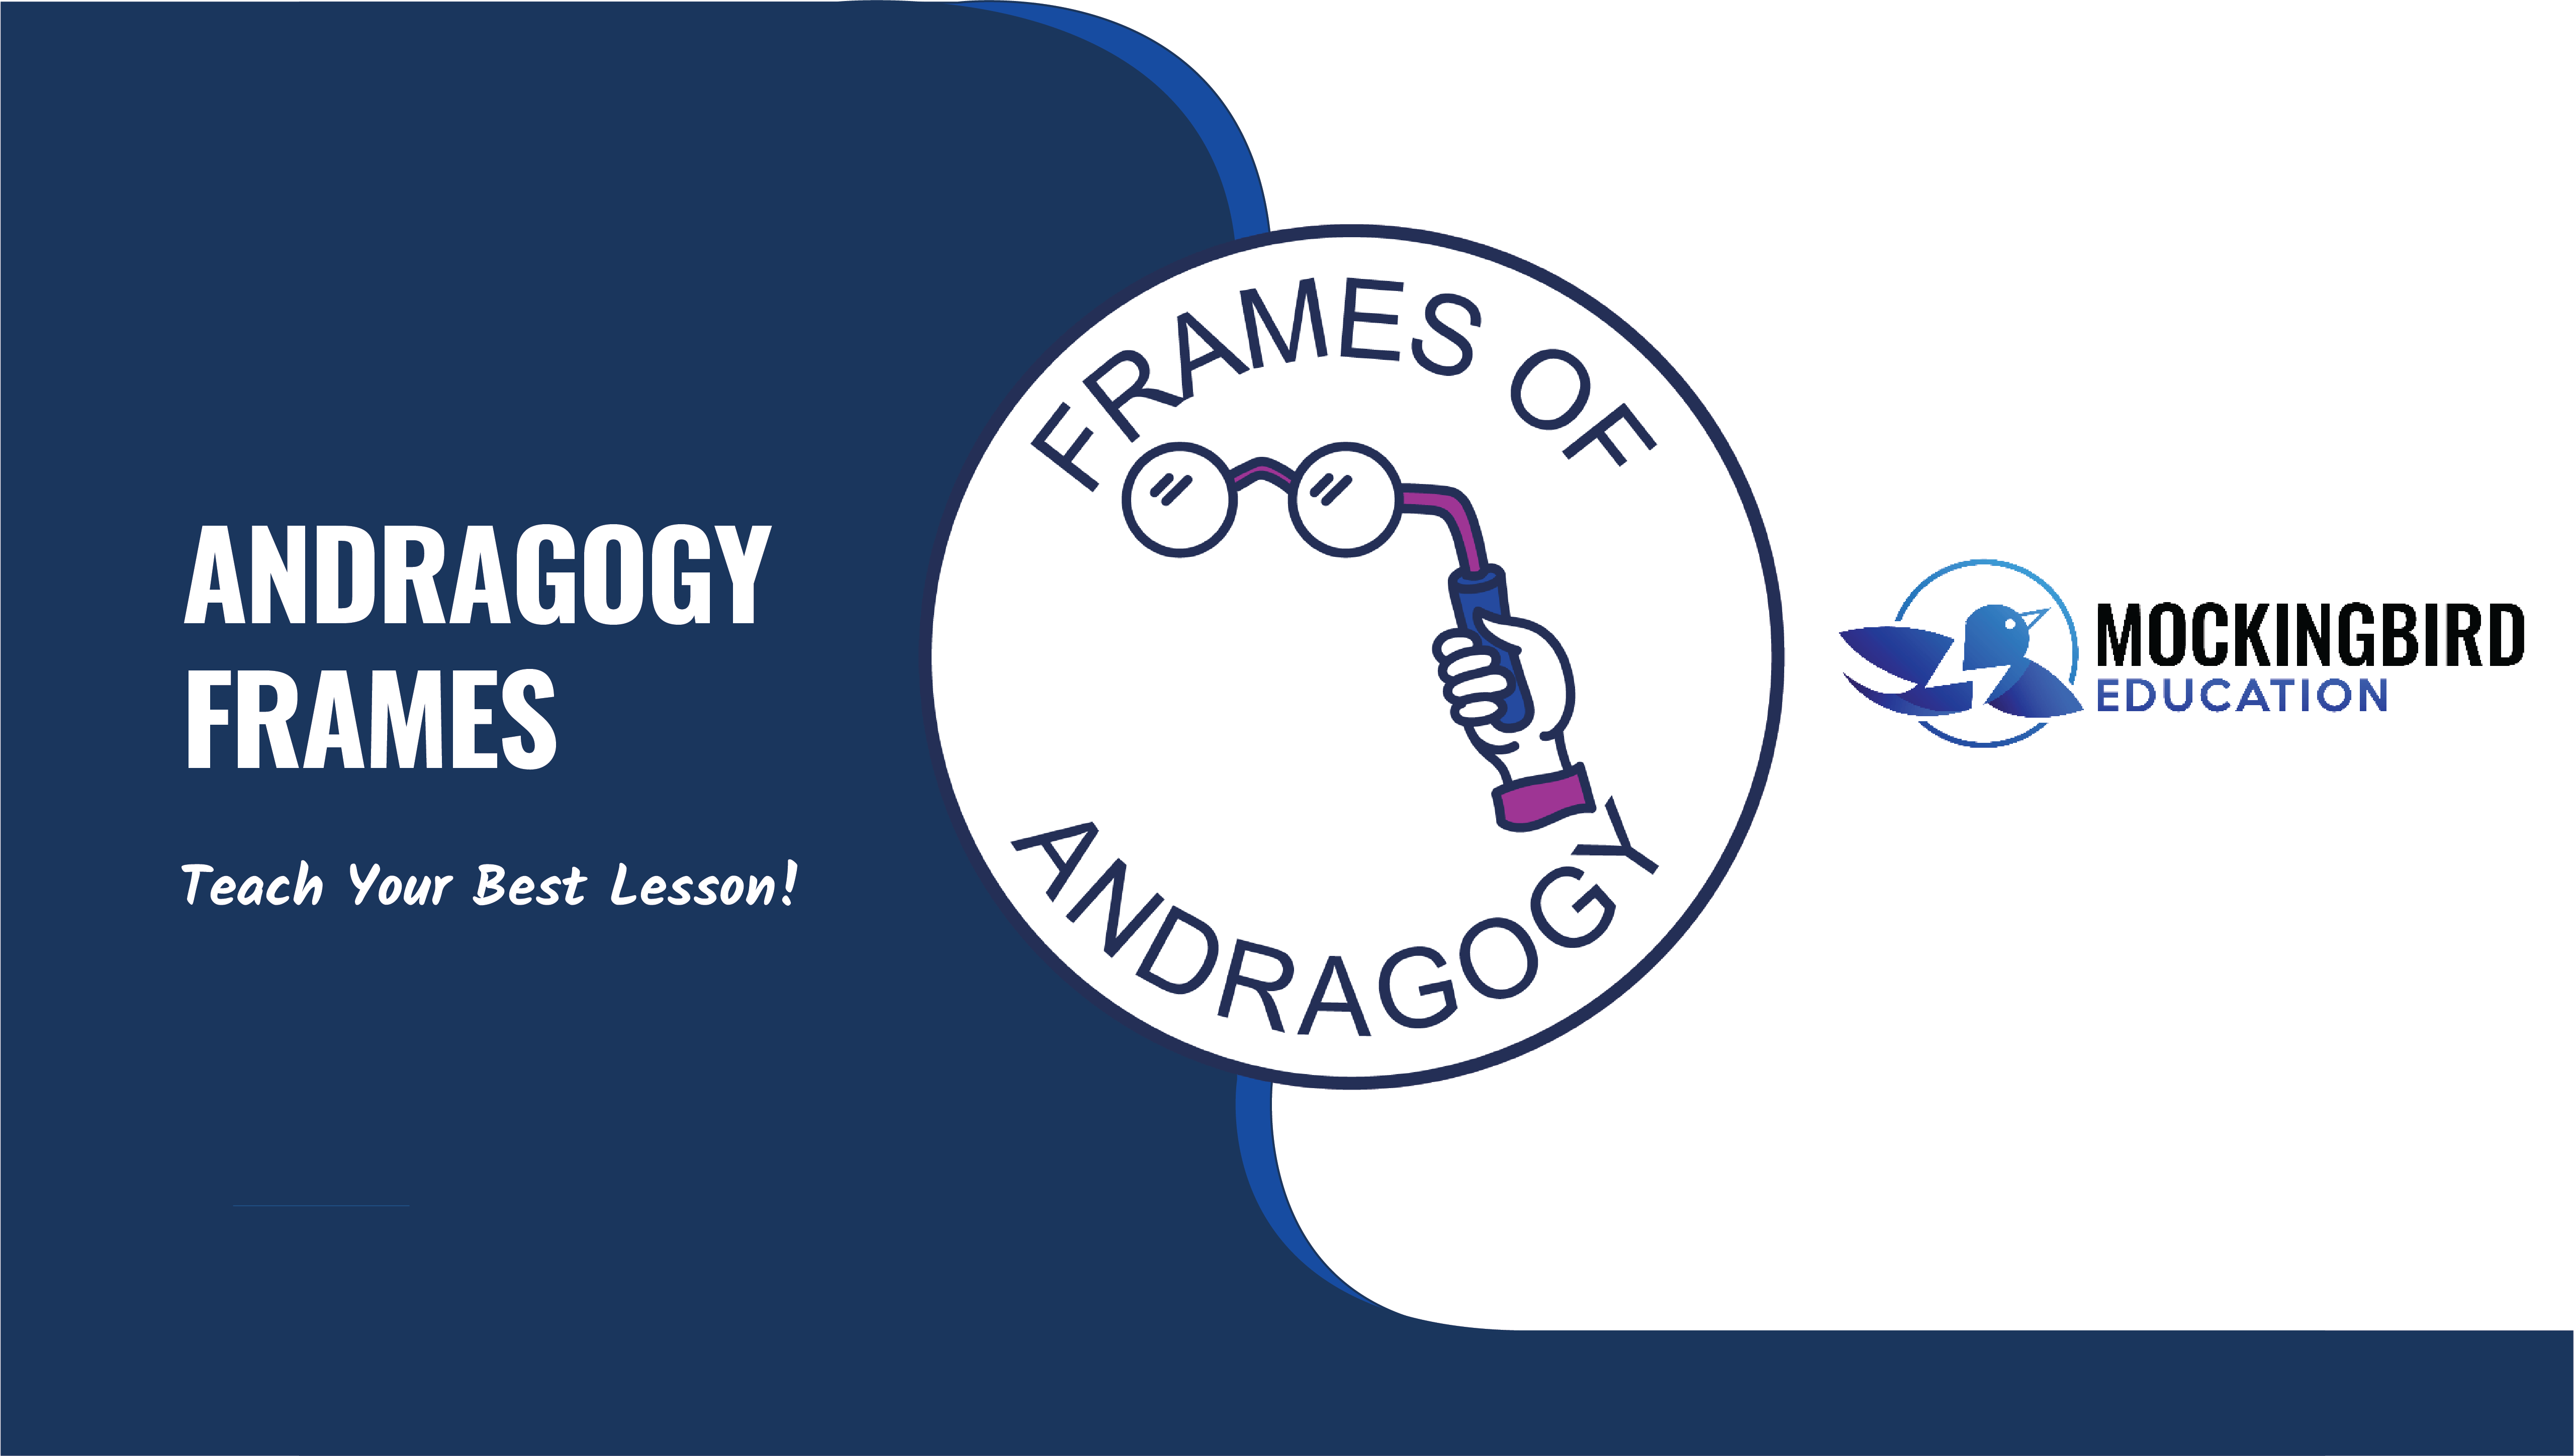 The Frames of Andragogy: A Brief Explanation